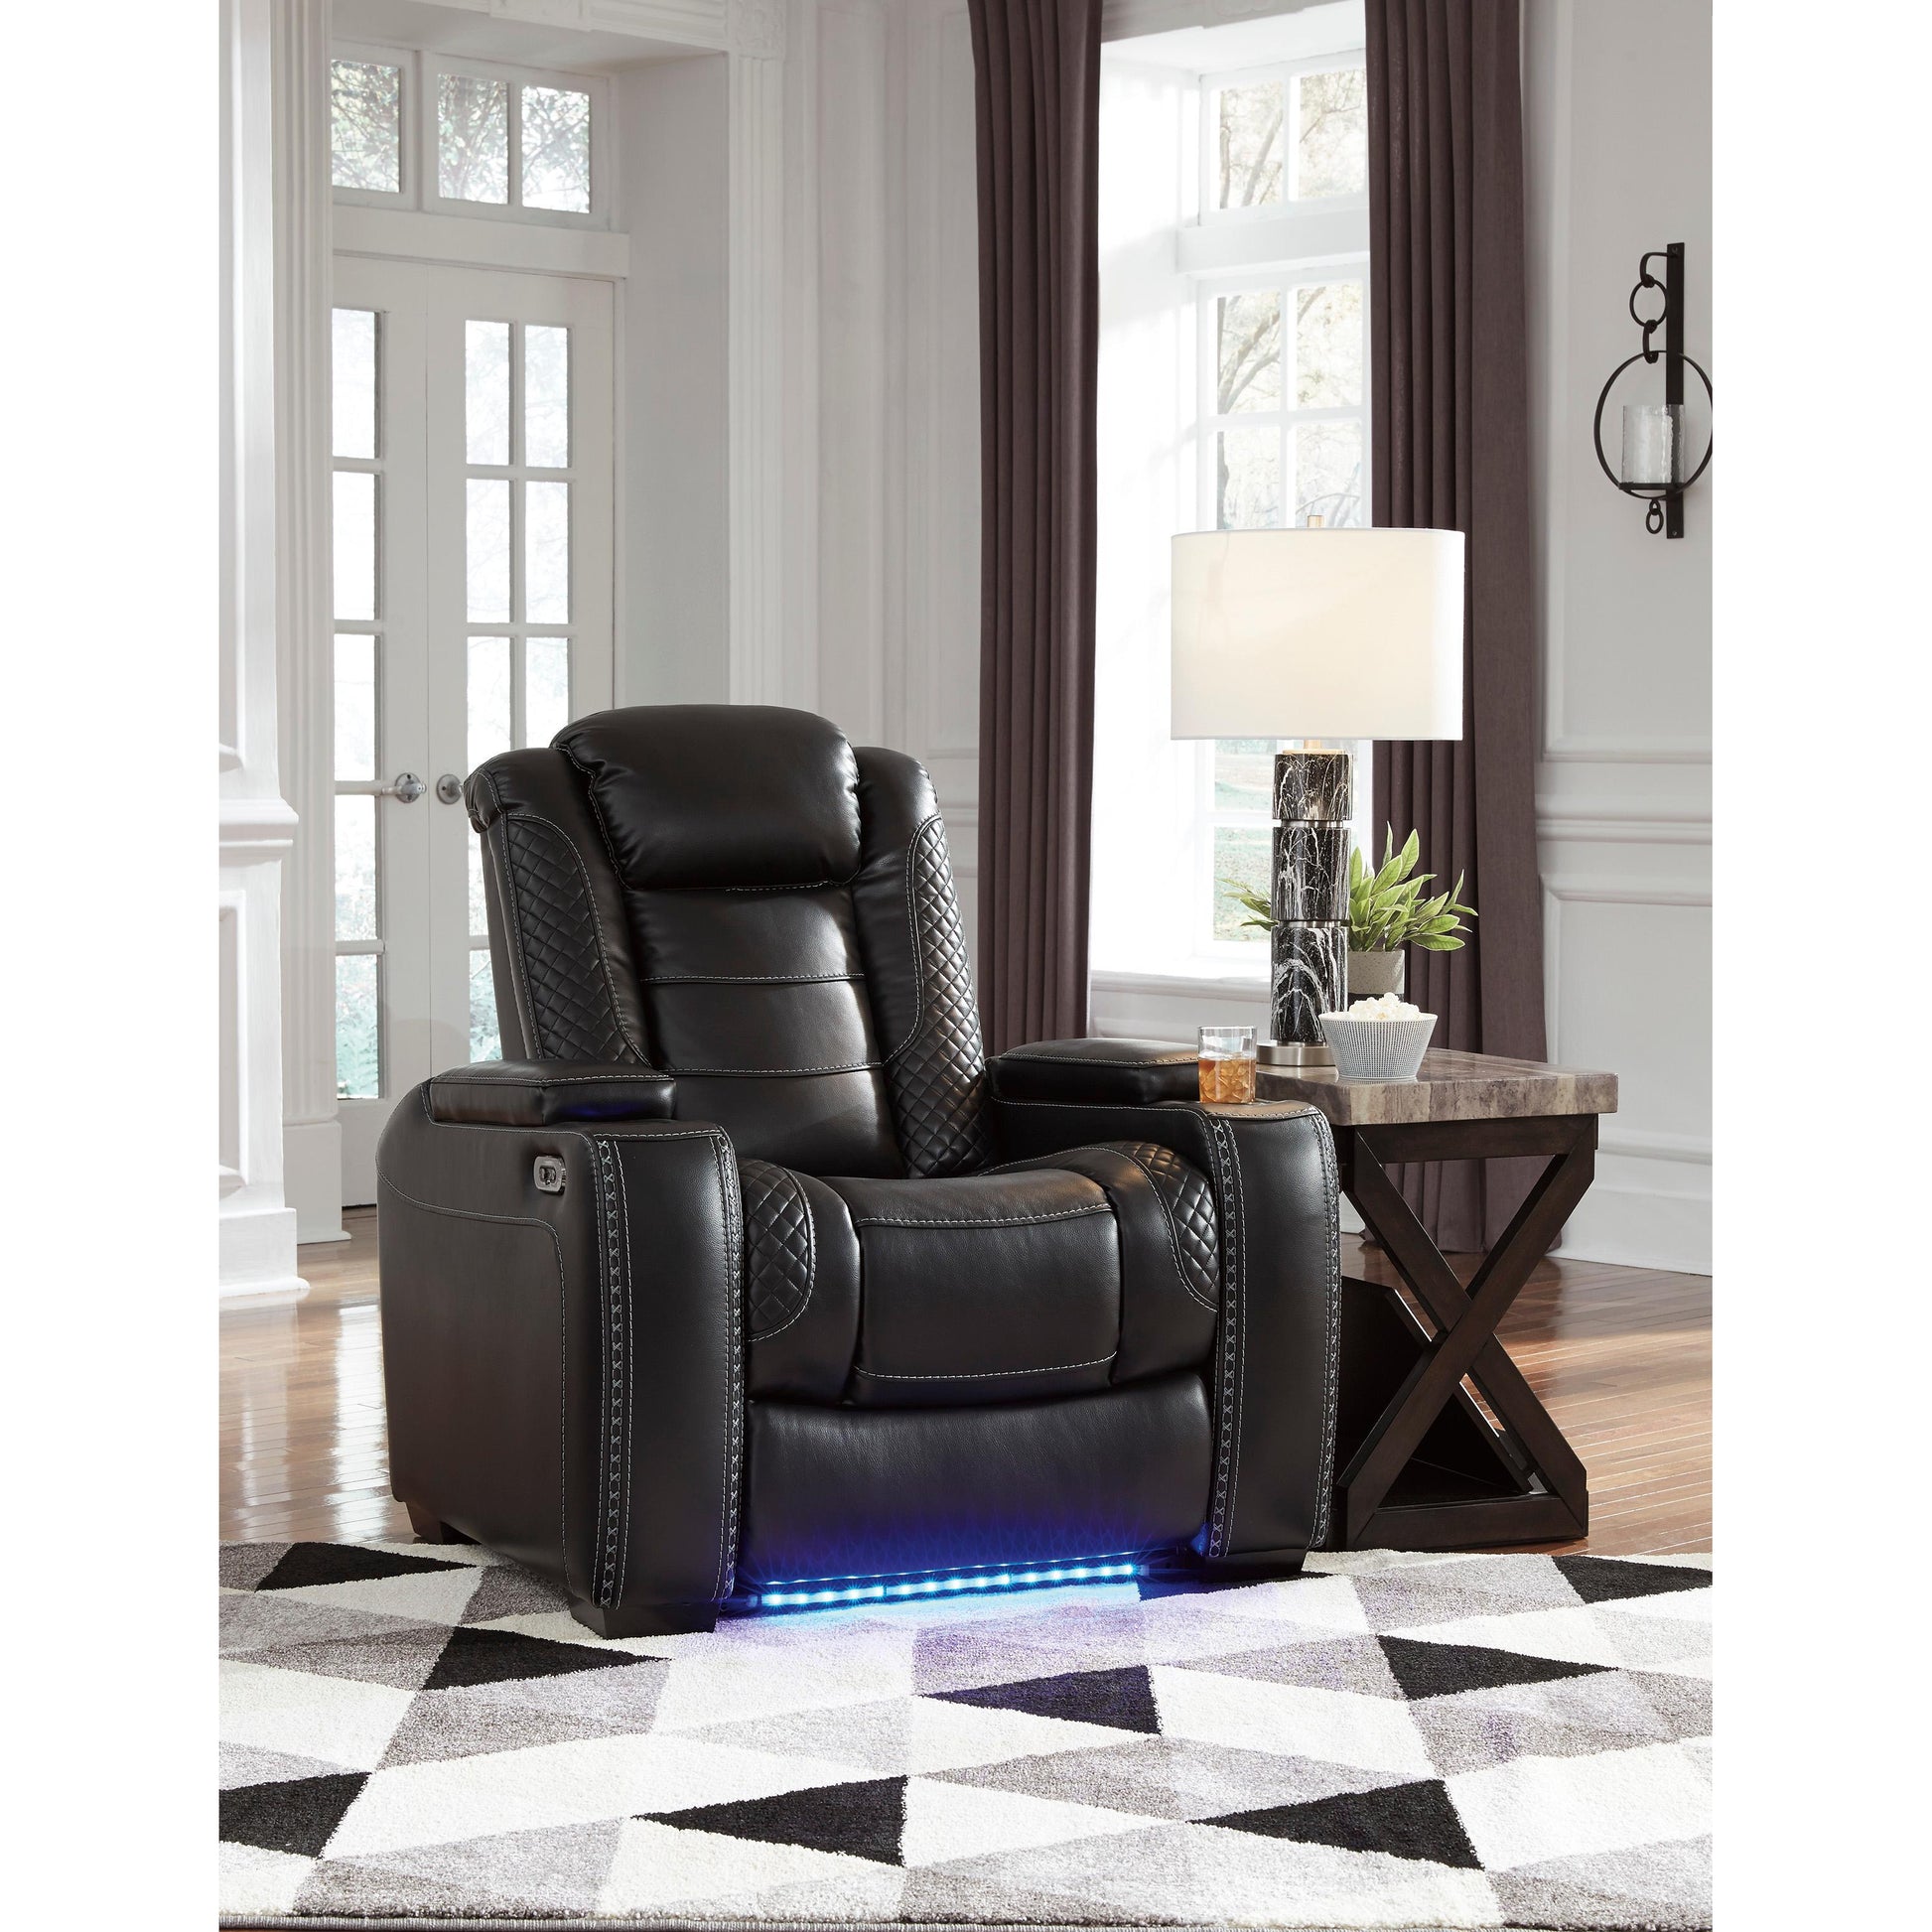 Signature Design by Ashley Party Time 37003 3 pc Power Reclining Living Room Set IMAGE 5